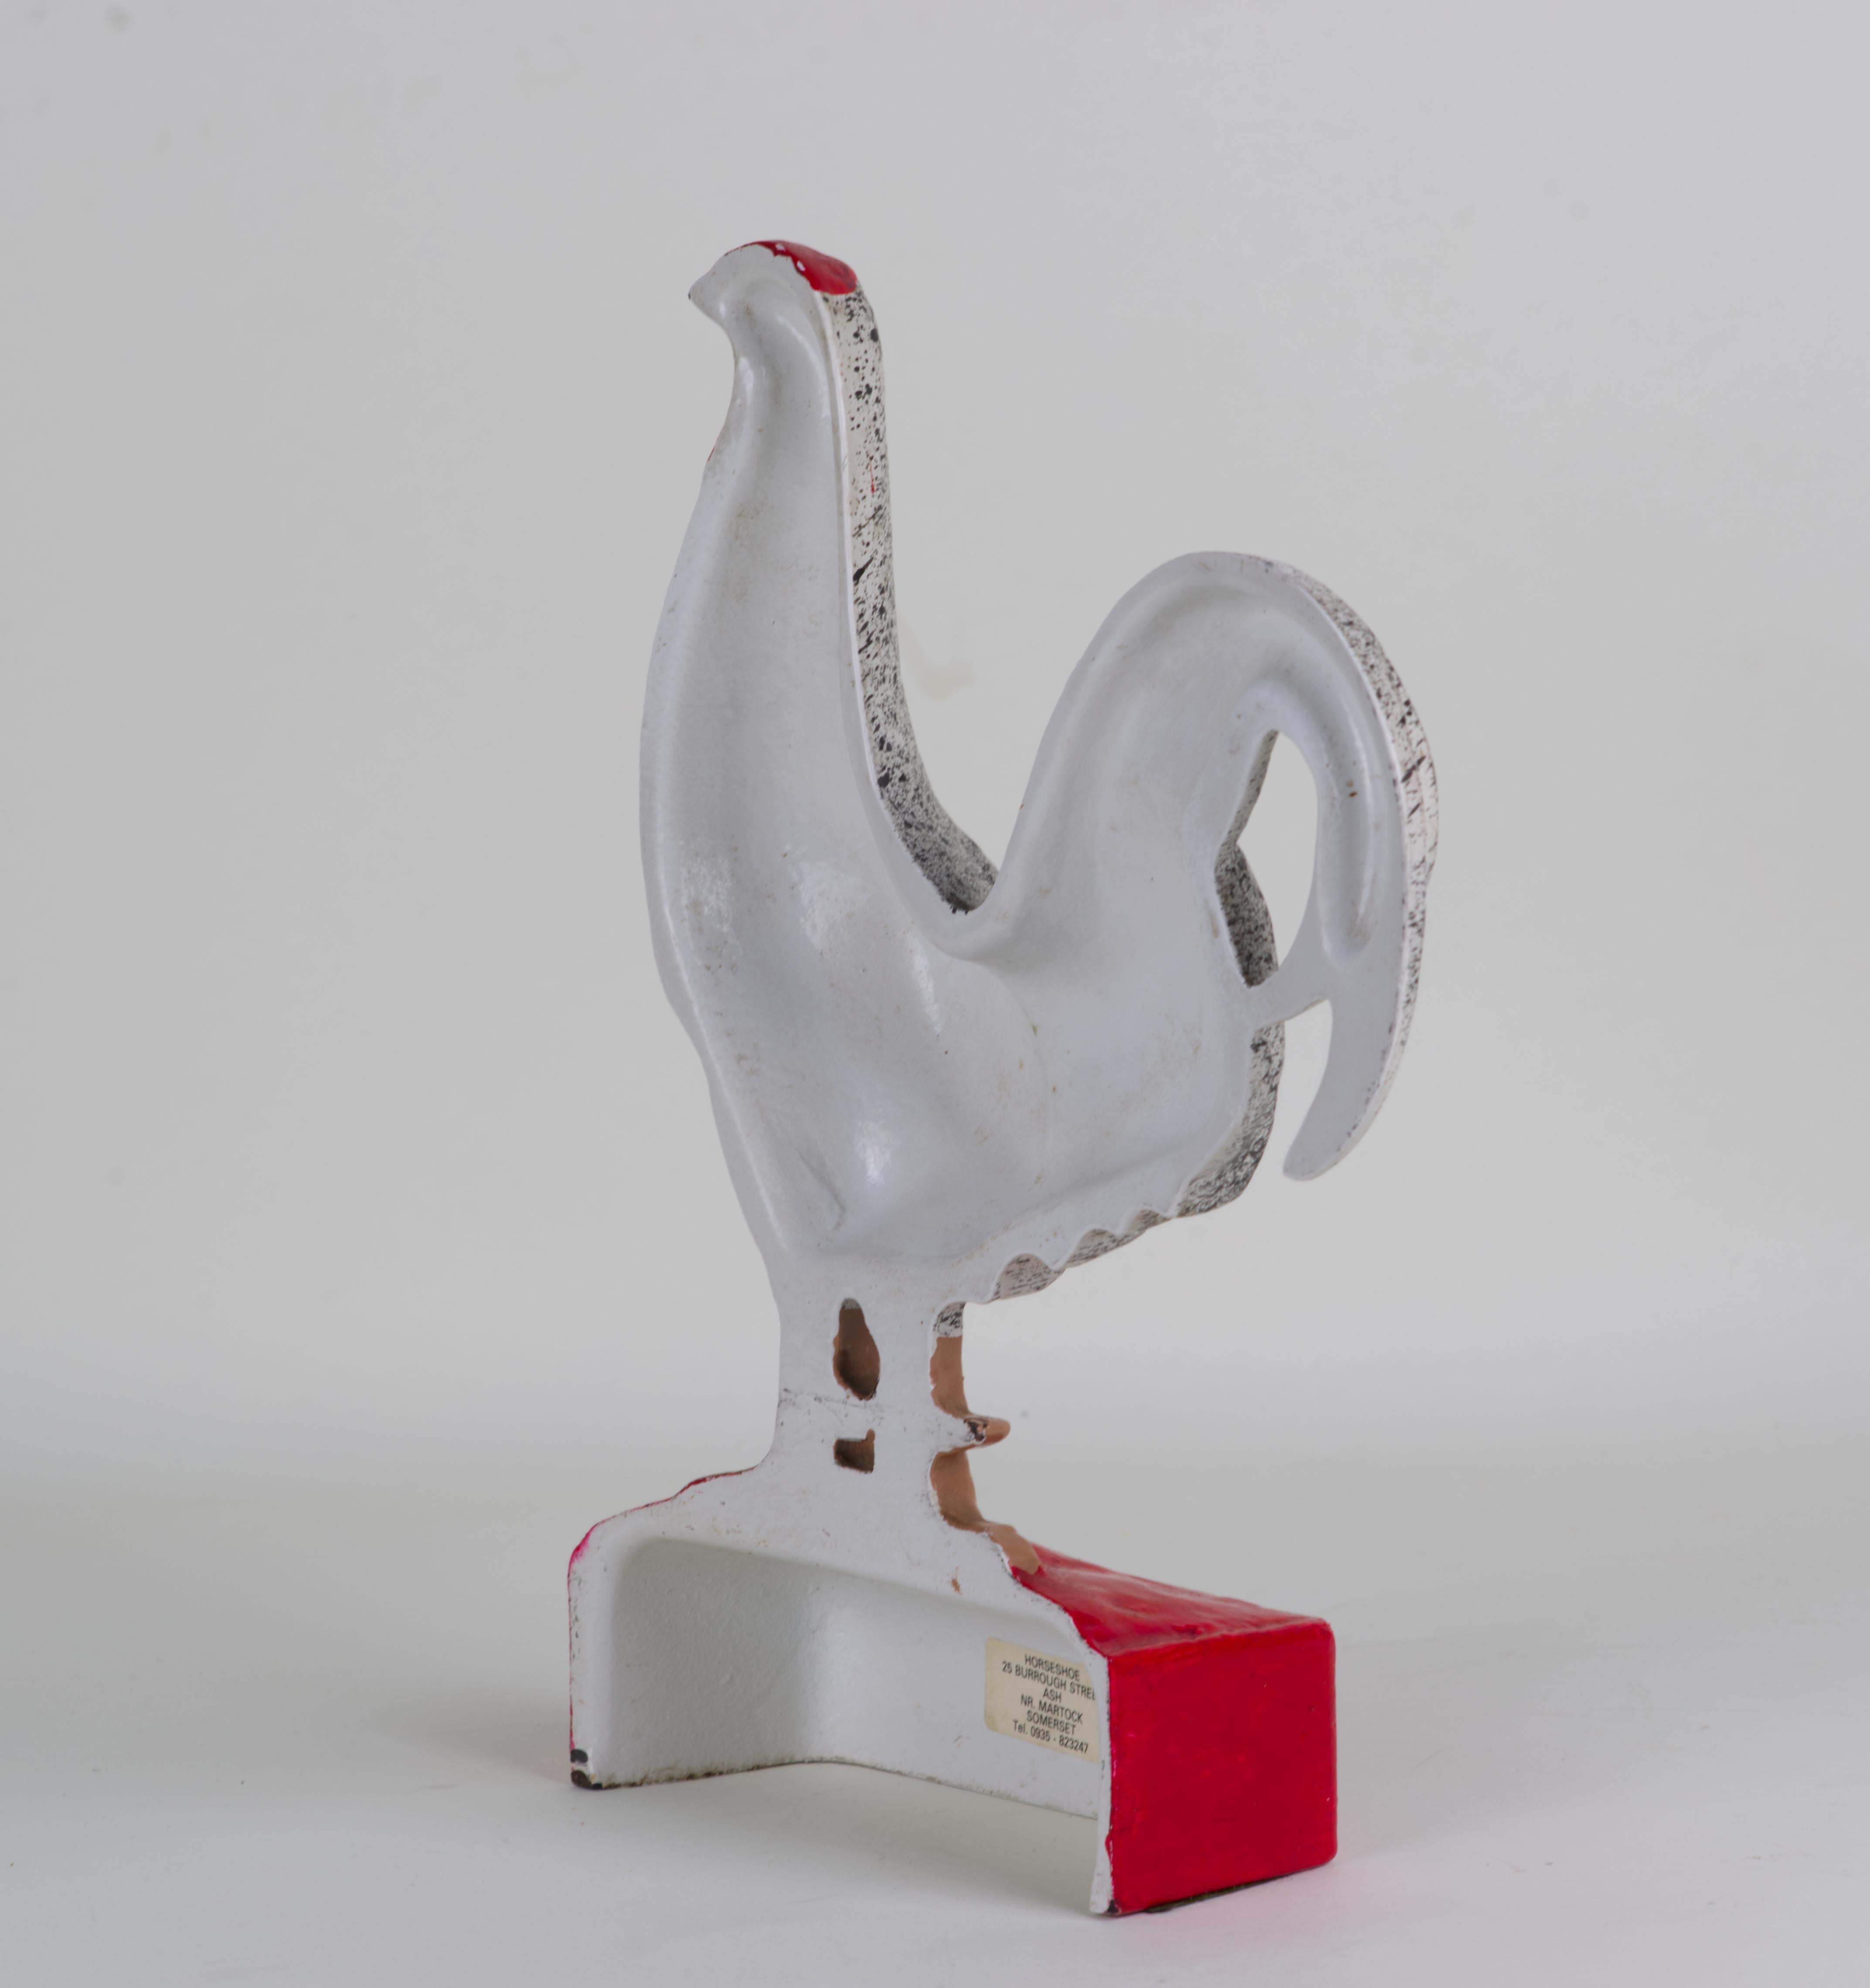 20th Century Cast Iron Enameled Chicken Figurine, Decor or Doorstop, Vintage, England. For Sale